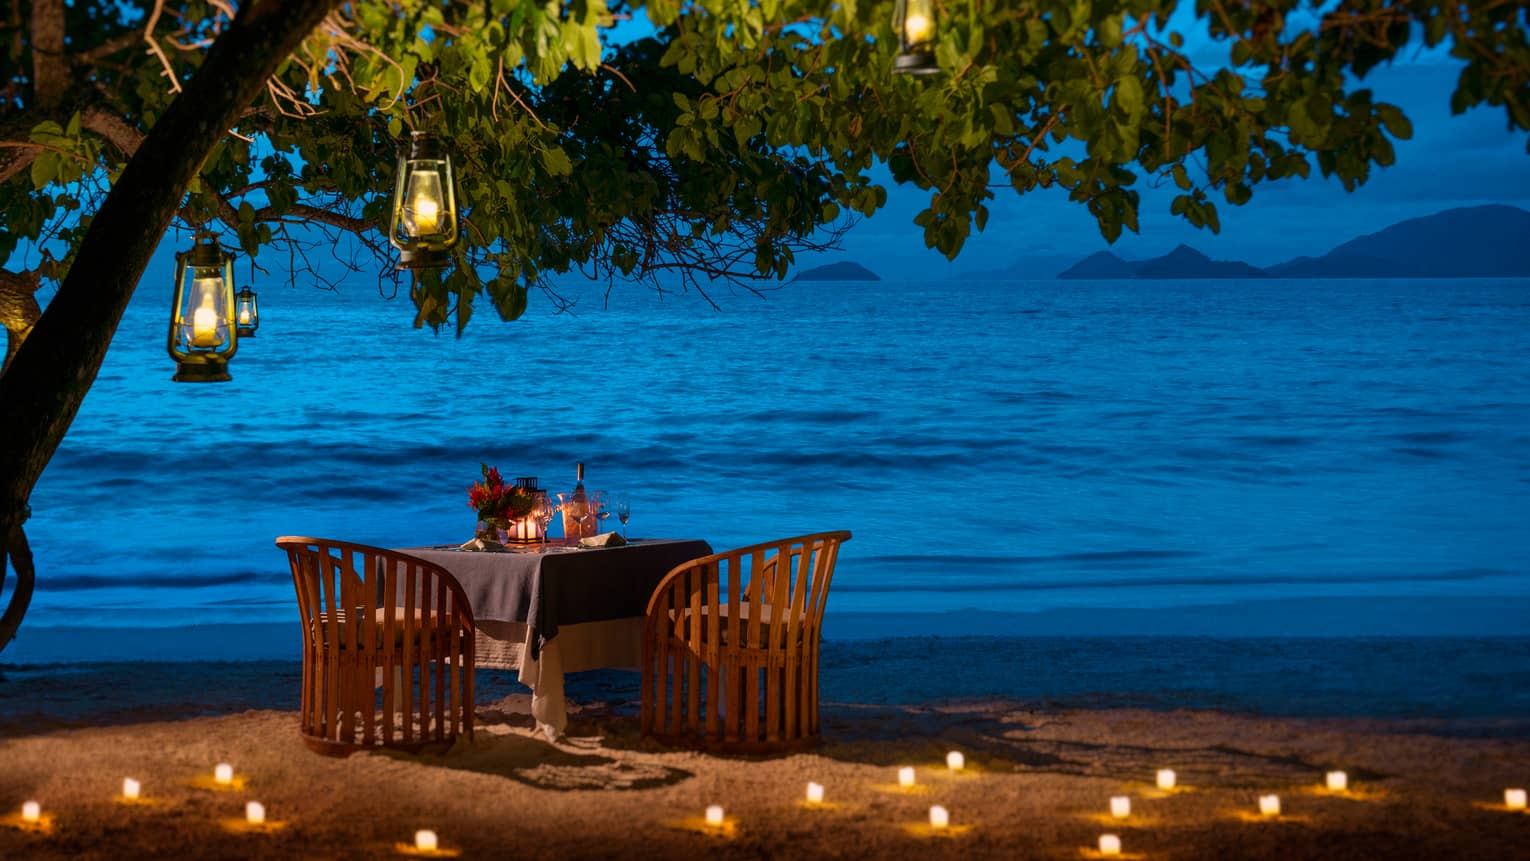 Round candle-lit dining table under tree, lanterns on beach at night